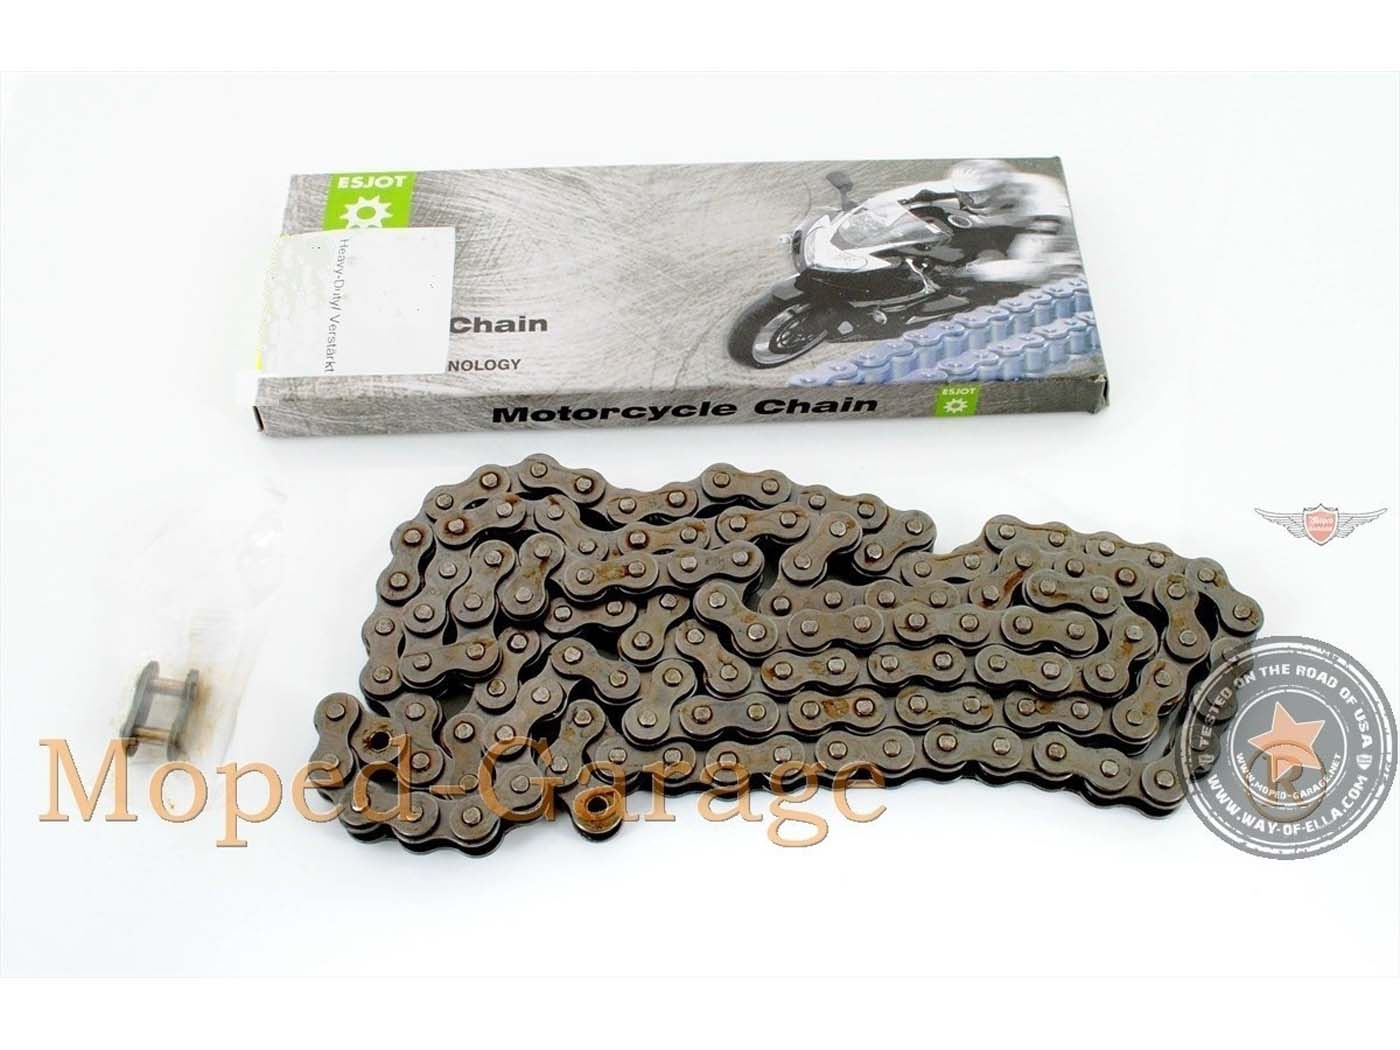 Chain Ejsot 110 Links Reinforced For Motorcycle Moped